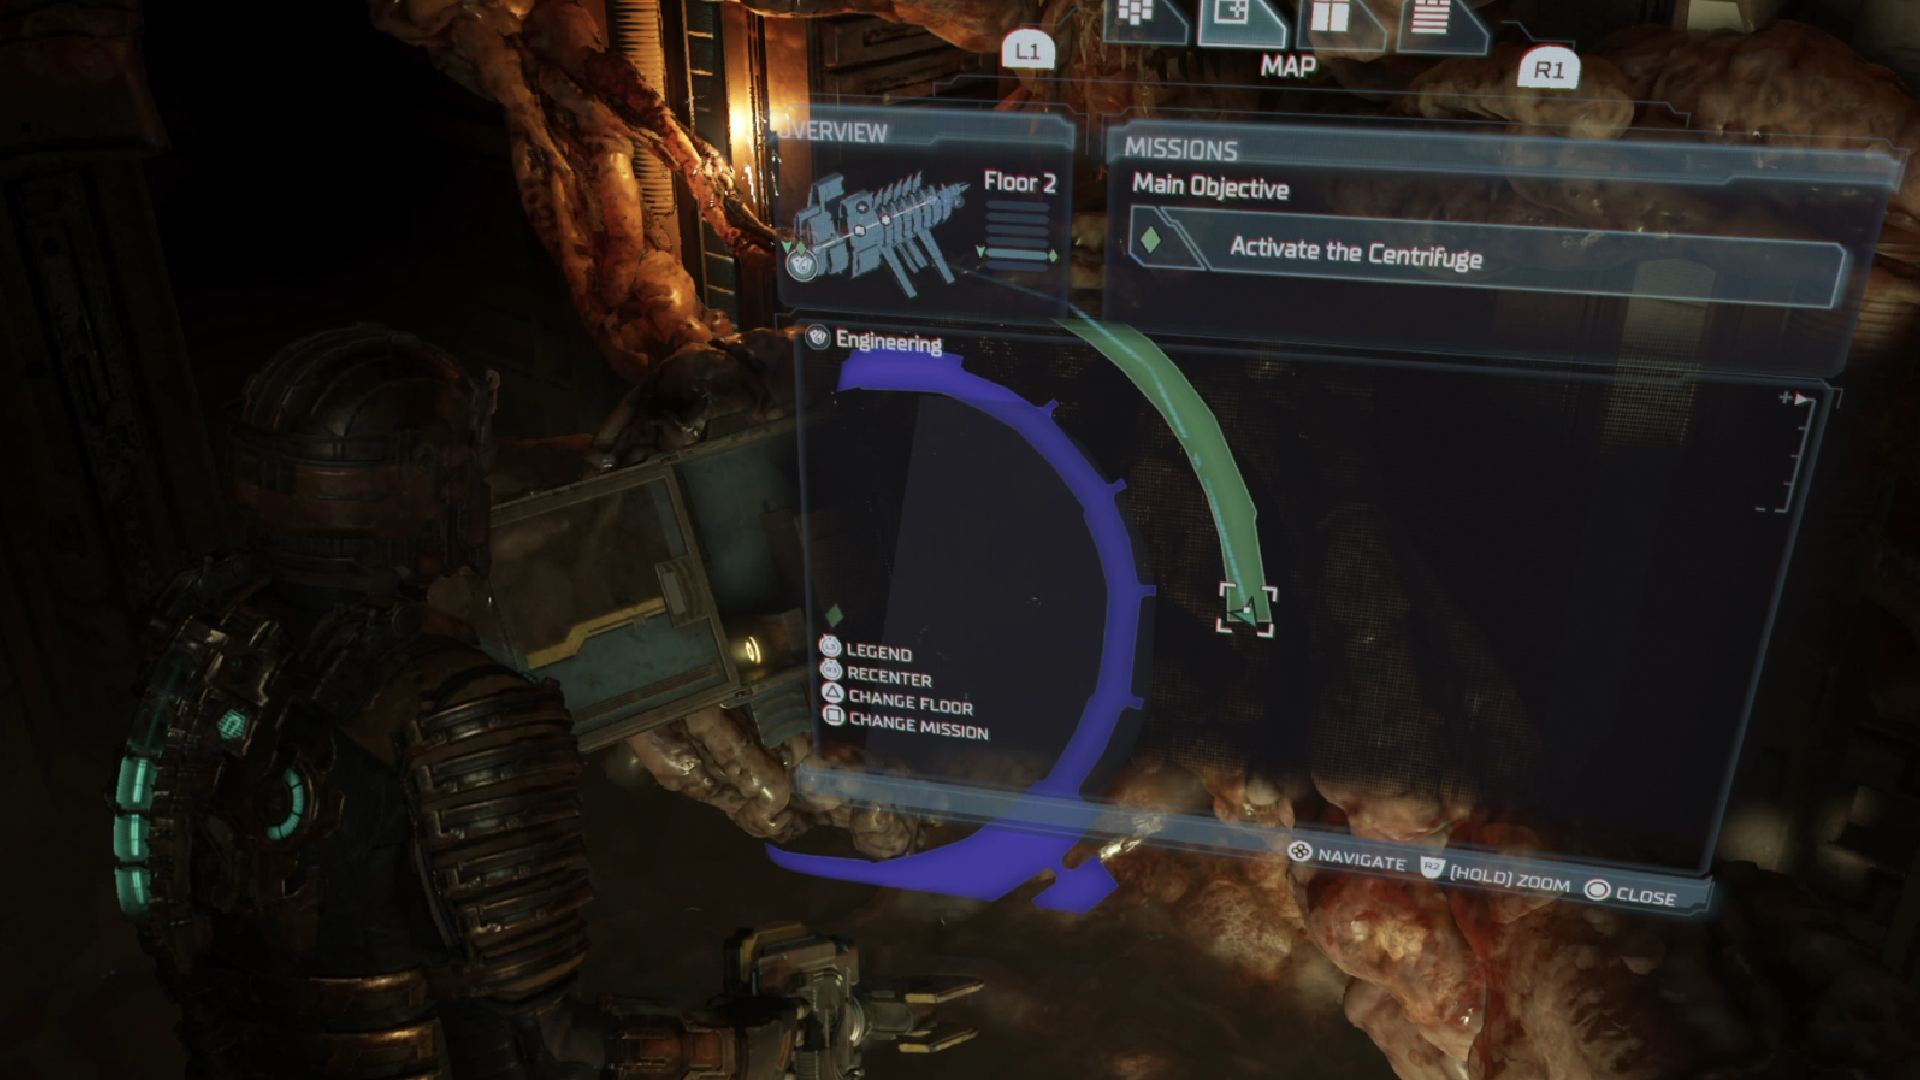 Dead Space Nodes: The node can be seen